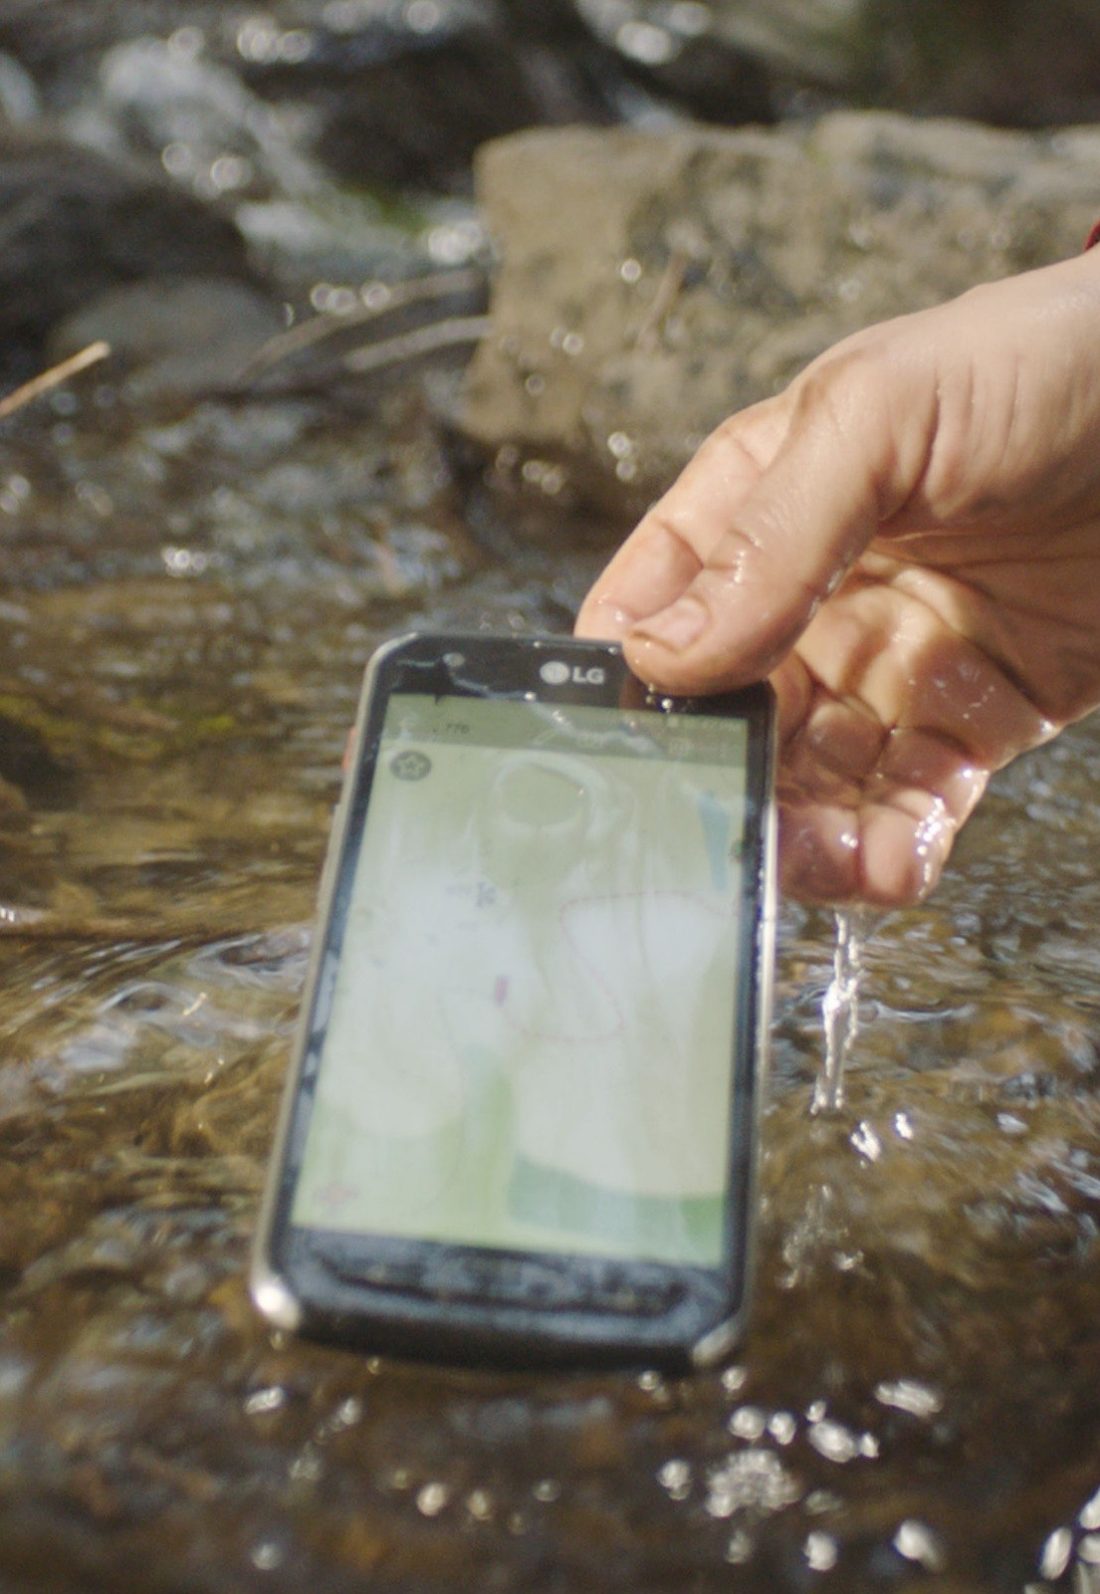 A hand lifting the water-resistant LG X Venture smartphone from water, the phone is still turned on